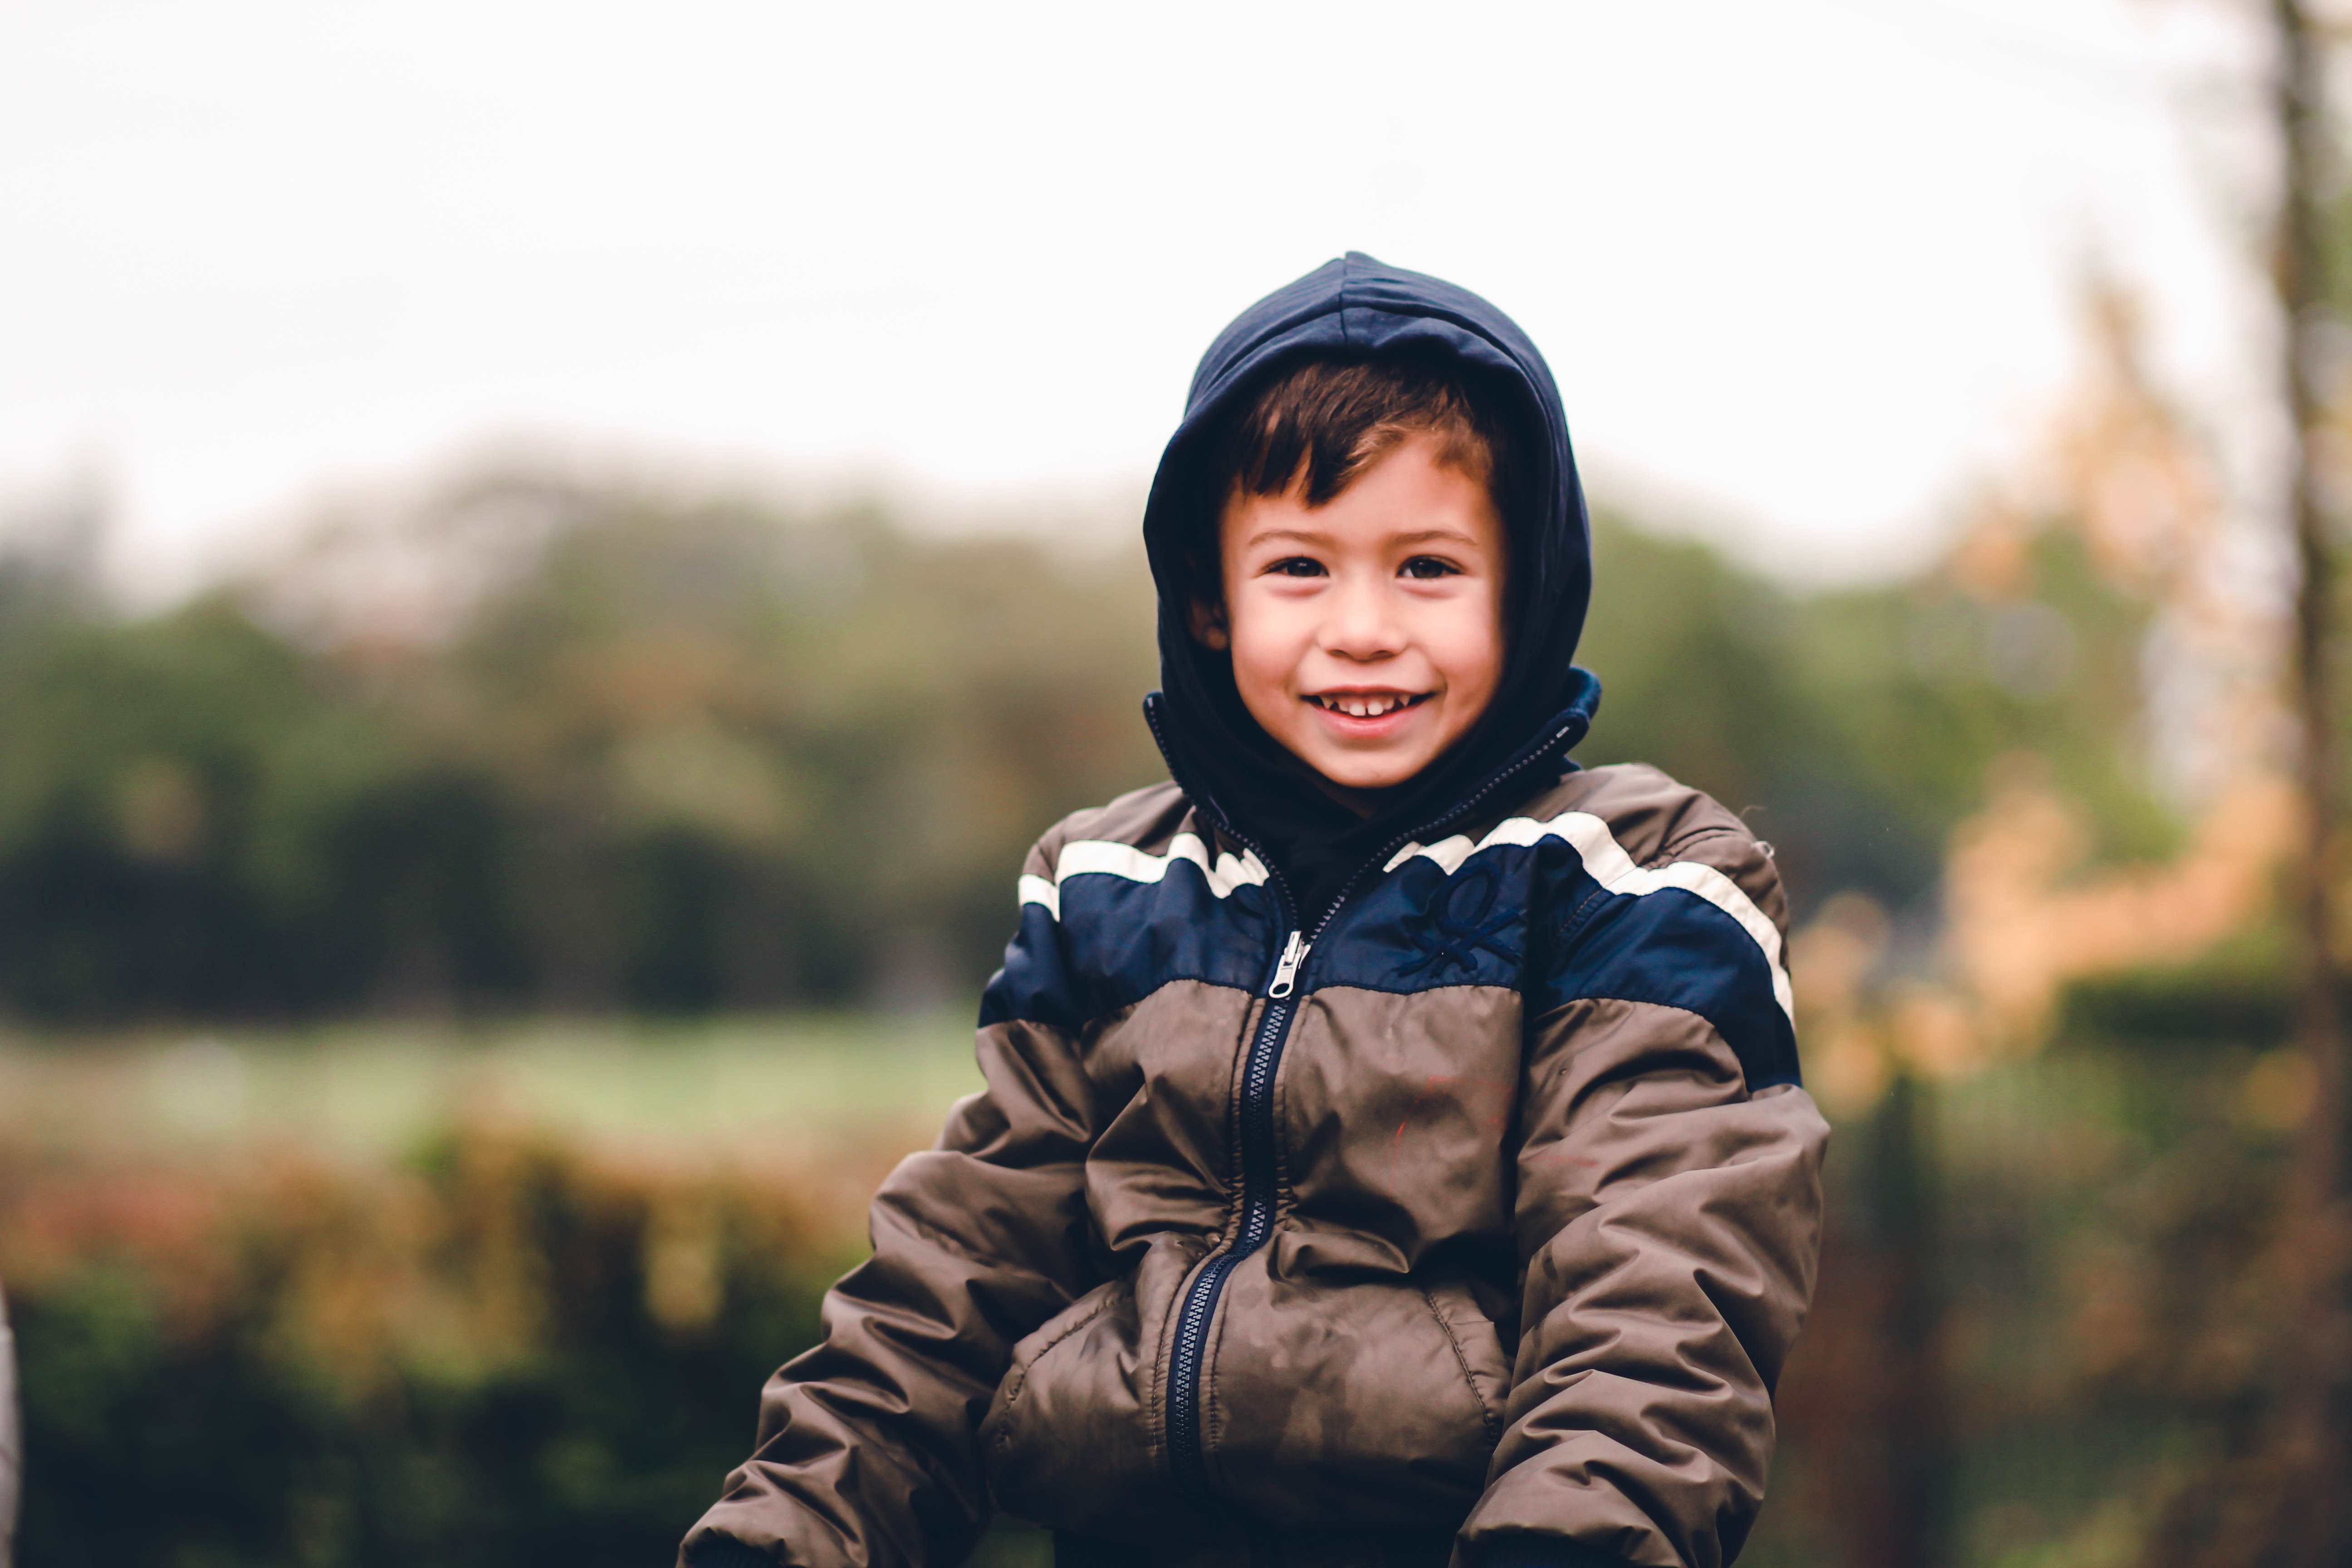 David picked up the ball, rolled up to the boy, and handed over the ball to him | Source: Pexels